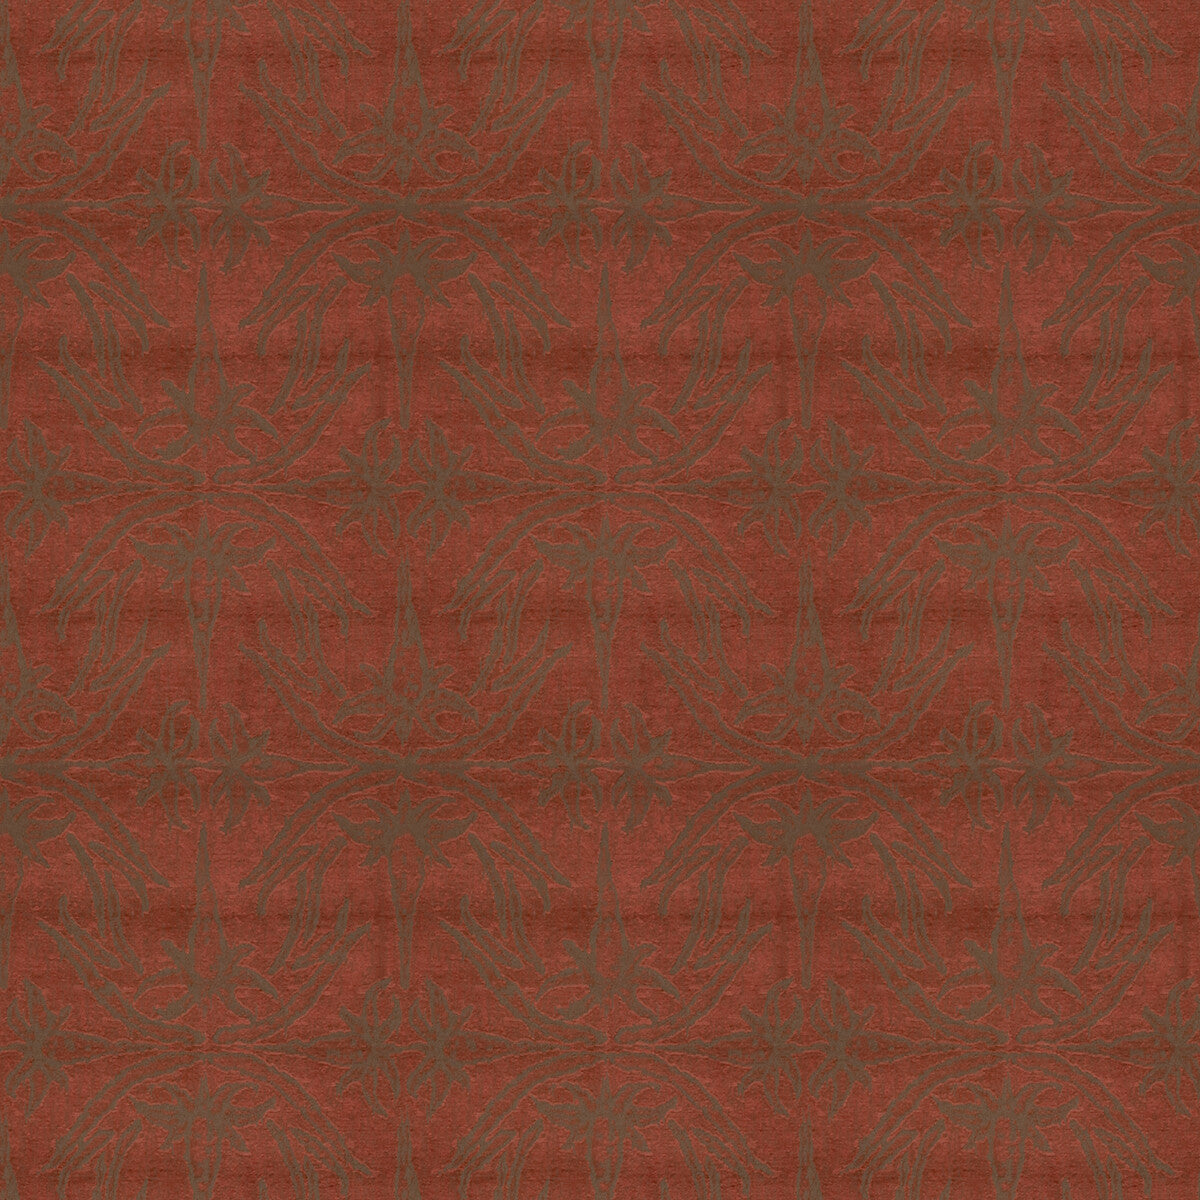 Lily Branch fabric in red color - pattern GWF-2926.19.0 - by Lee Jofa Modern in the Allegra Hicks II collection